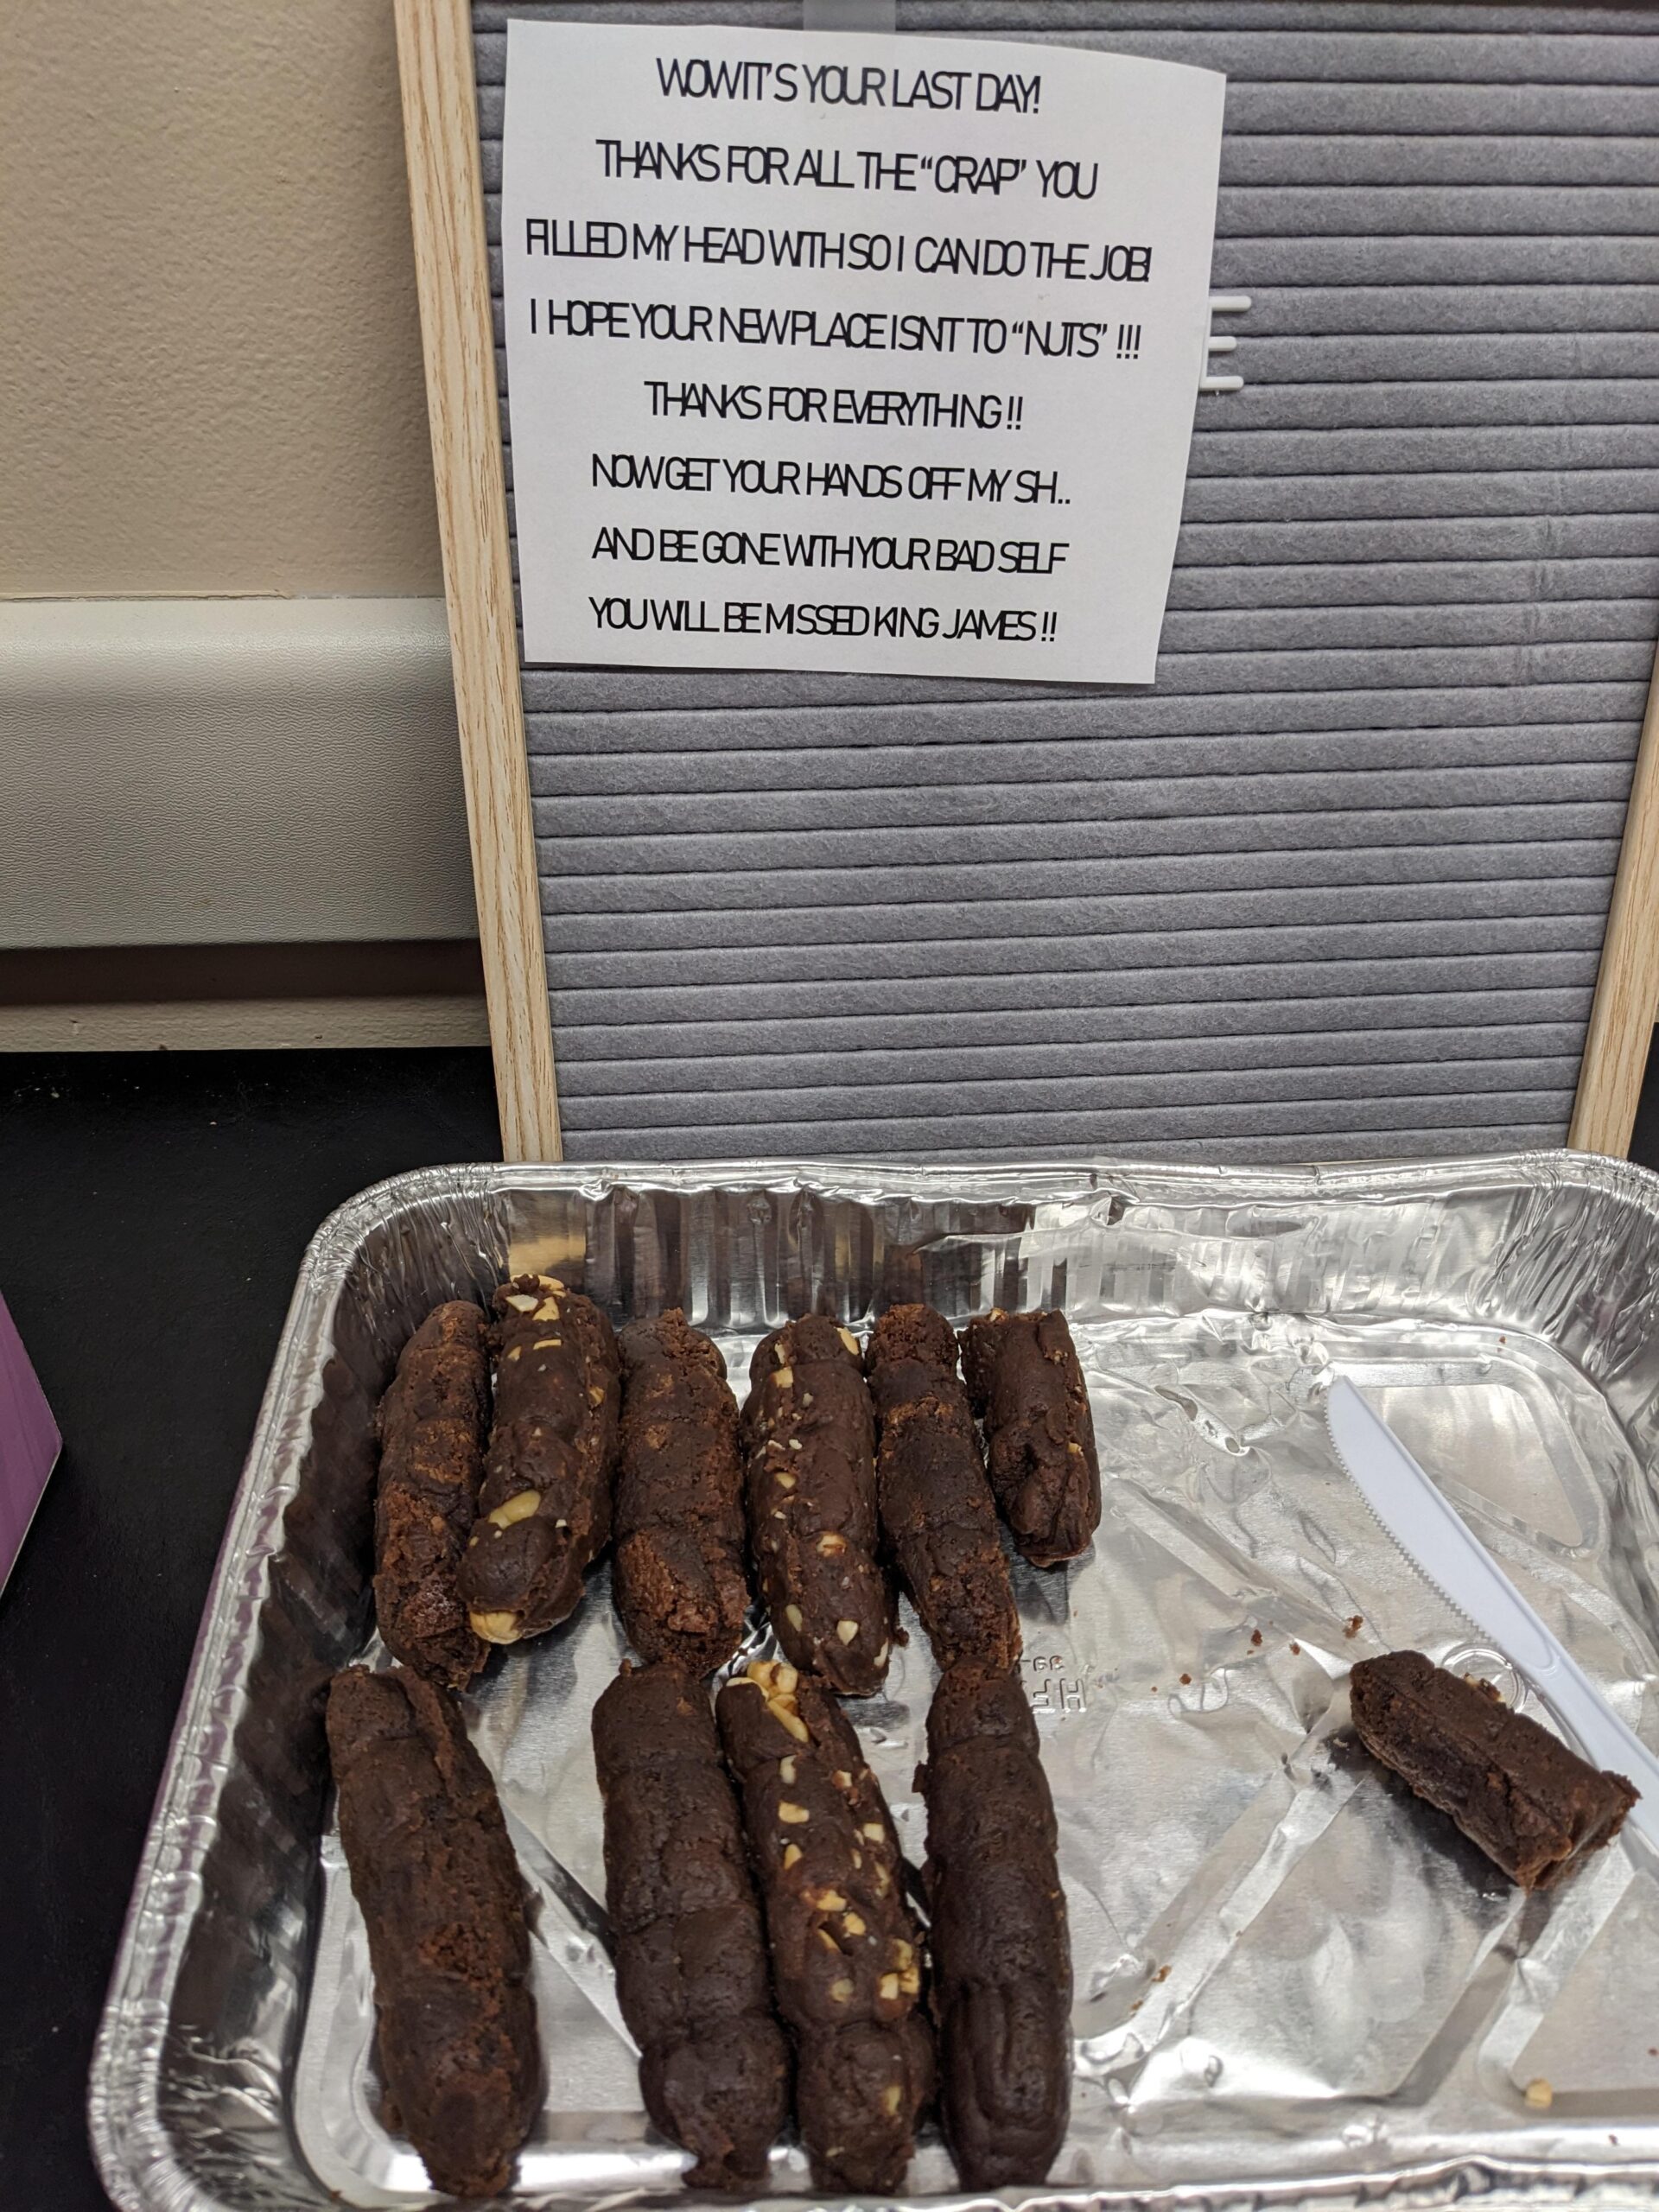 The Turd Baker strikes again at my work. Been about a year since she was hired and brought in the last batch of turd brownies